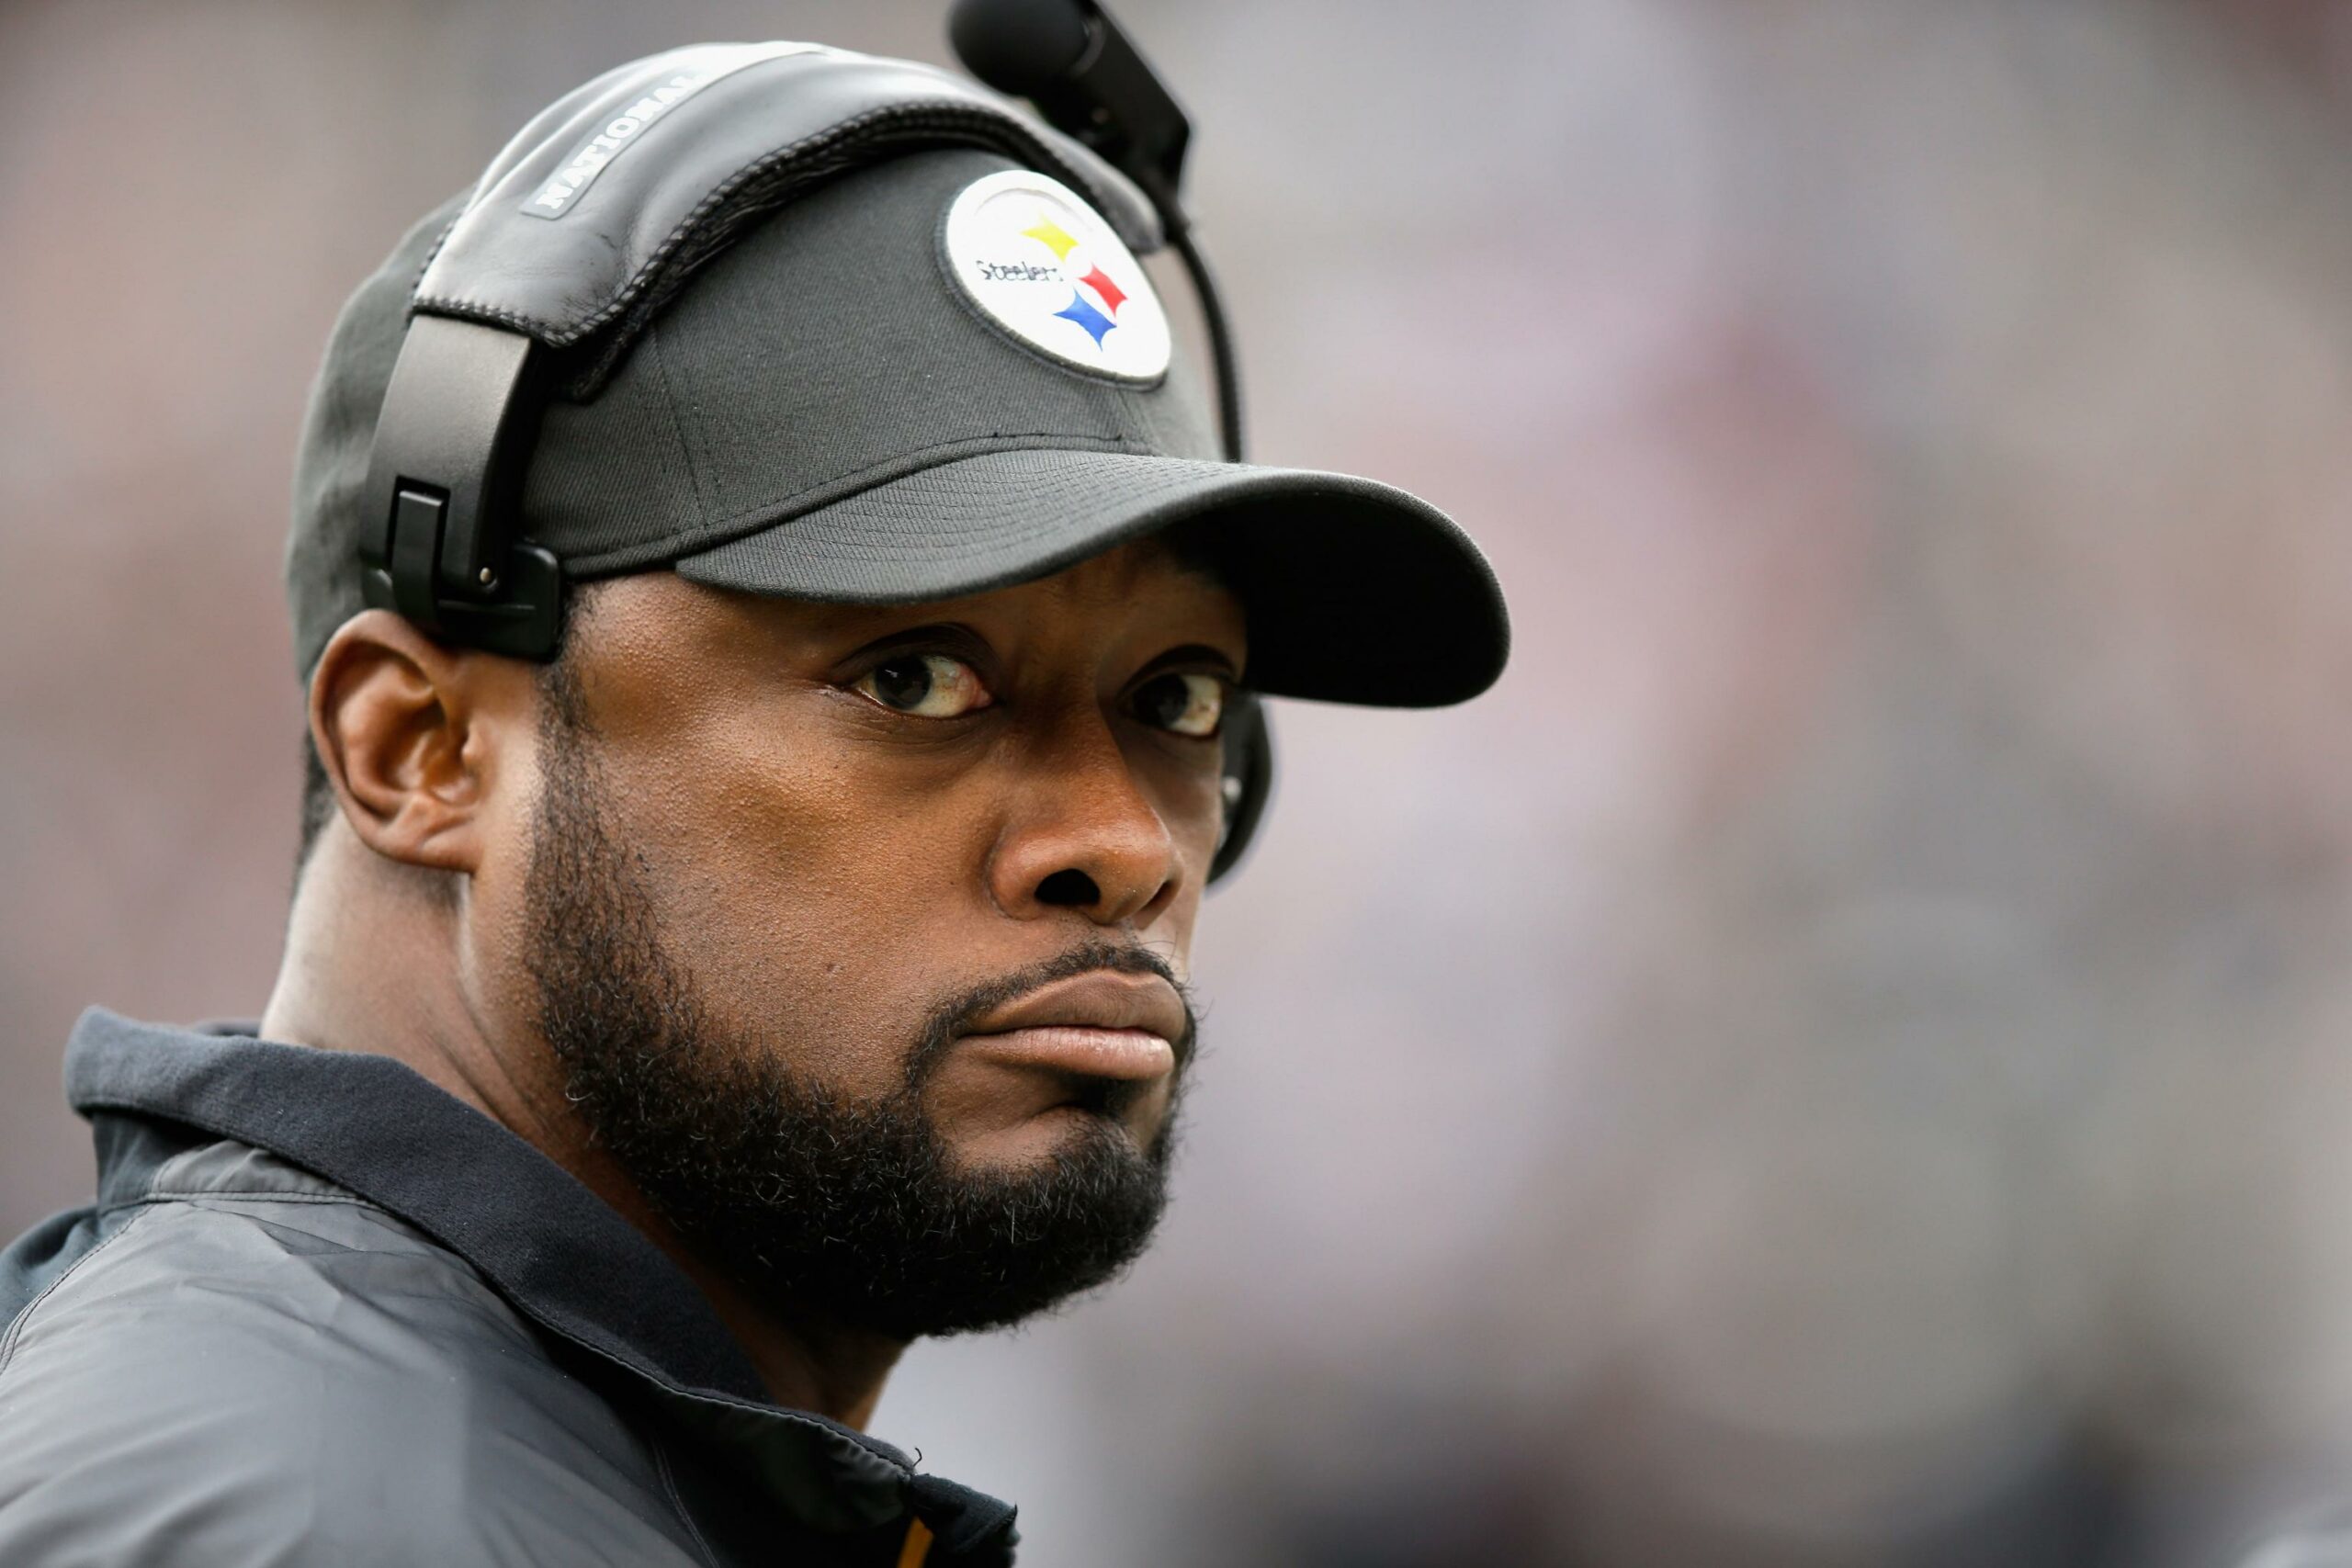 A clear and sad news: Pittsburgh Steelers coach have been fired